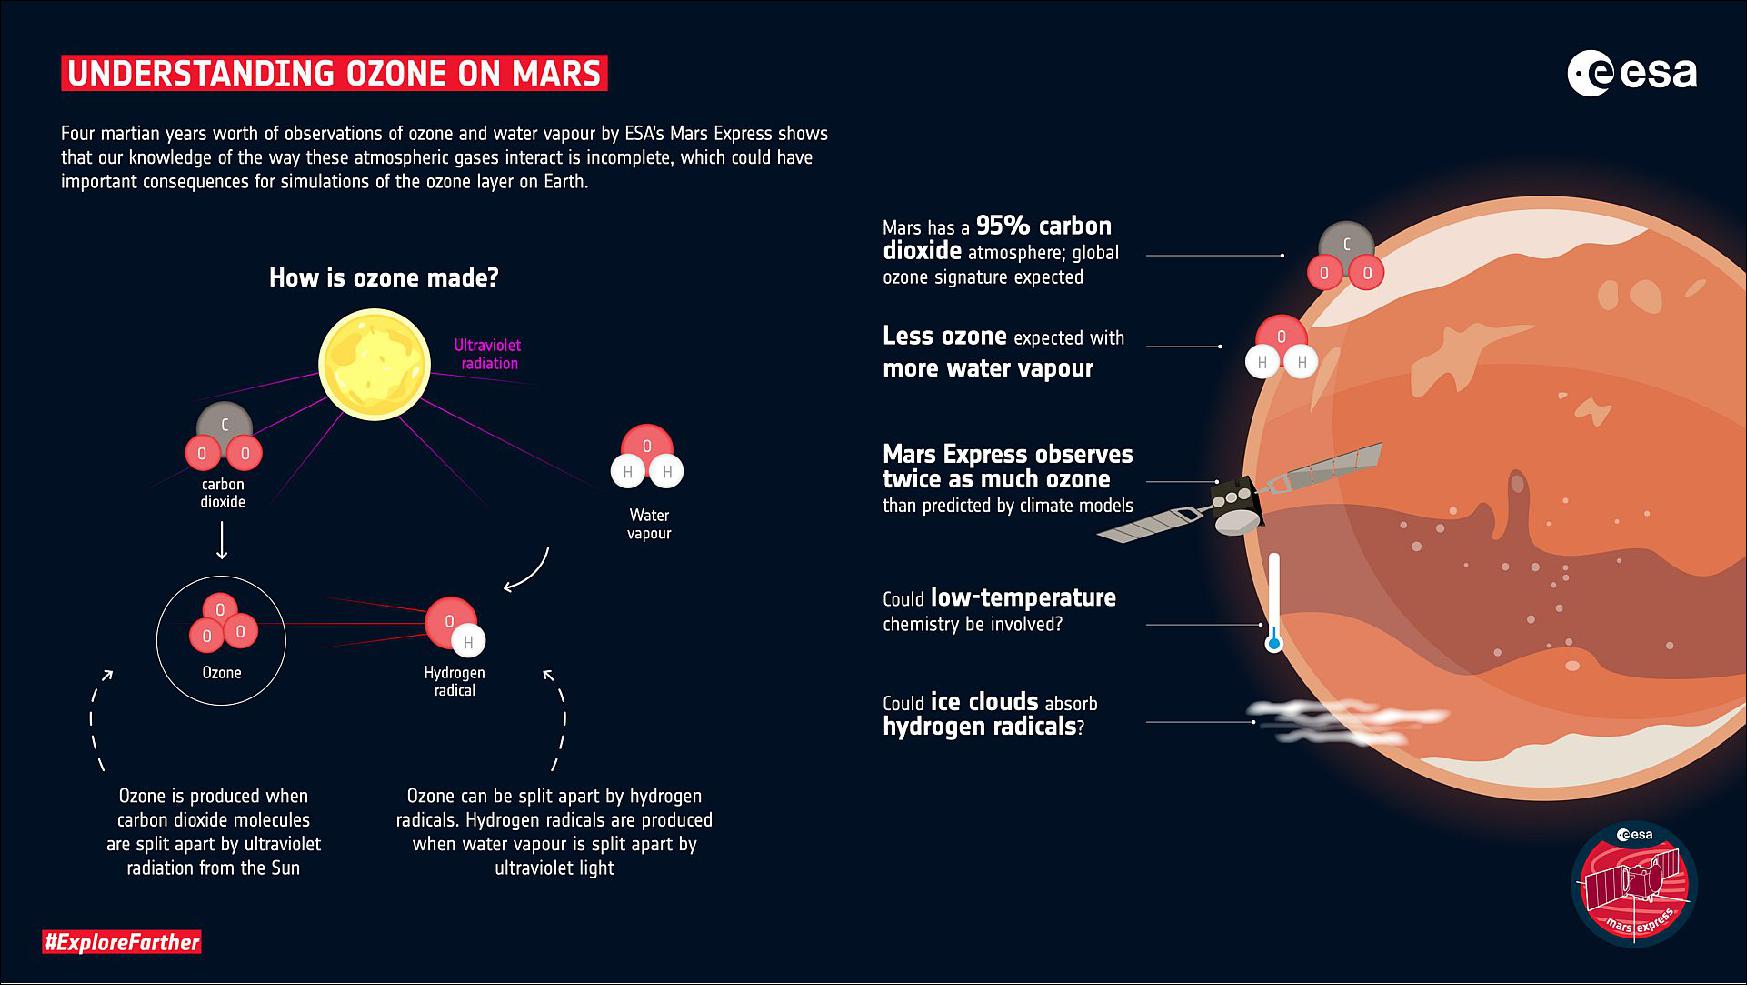 Figure 44: Understanding ozone on Mars. Ozone is produced on Mars when carbon dioxide molecules are split apart by ultraviolet radiation from the Sun. Ozone can be split apart by hydrogen radicals, which are produced when water vapor is split apart by ultraviolet light. The fact that Mars’ atmosphere is 95% carbon dioxide suggests that a global ozone signature is to be expected, except where there is water vapor. But, for a given amount of water vapor, Mars Express observes twice as much ozone as predicted by climate models. Perhaps the ozone destruction by hydrogen radicals is less efficient than expected, or ice clouds could absorb the hydrogen radicals before they have time to split apart the ozone (image credit: ESA)